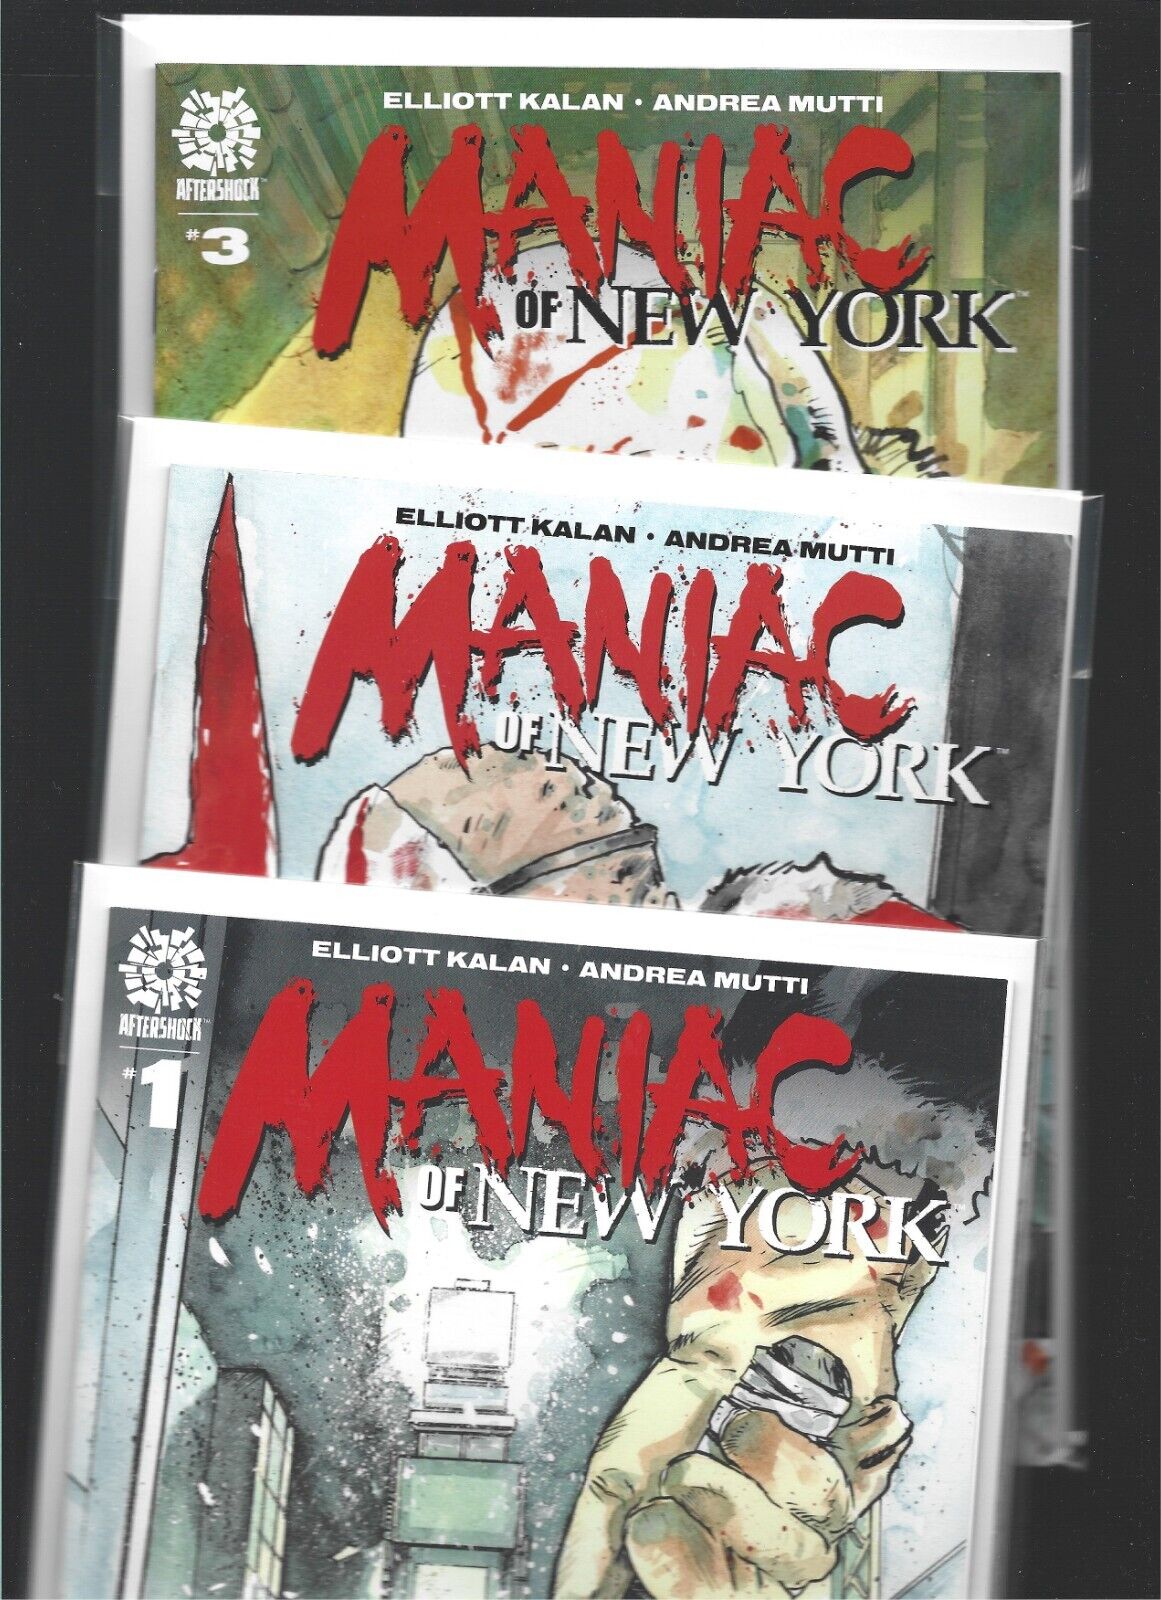 Maniac of New York #1 2 3 first prints volume one UNLIMITED SHIPPING $4.99